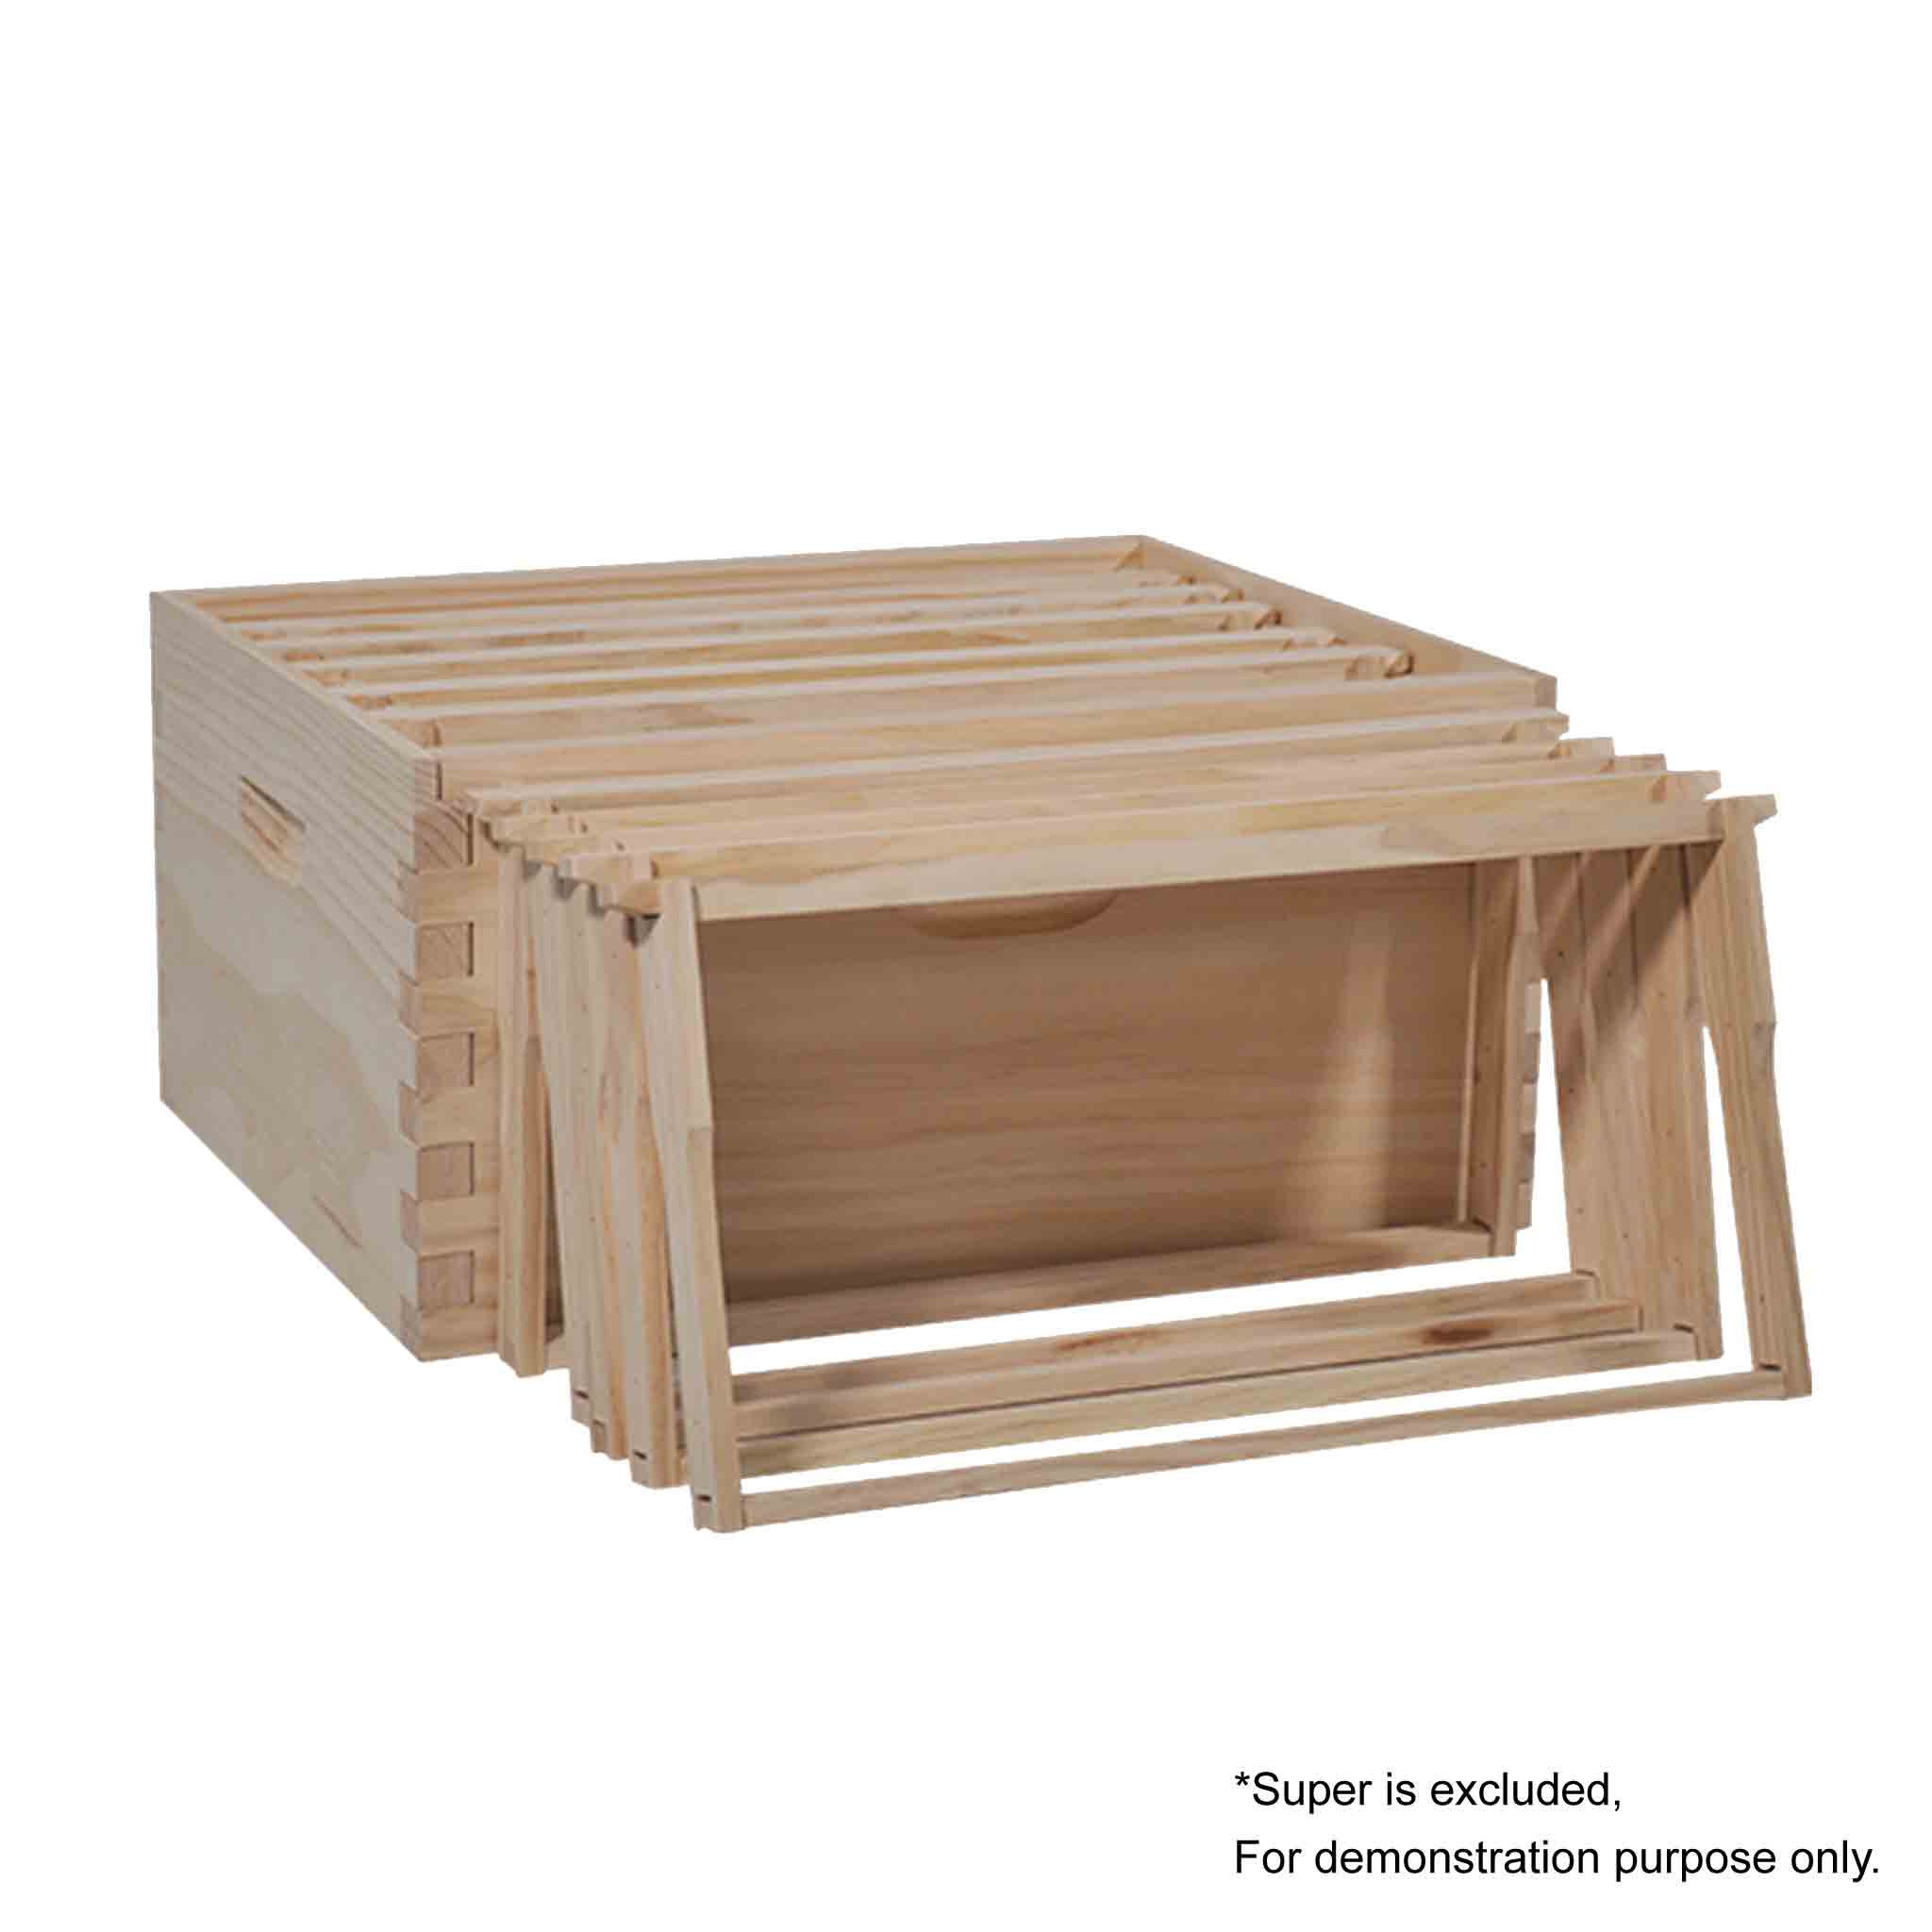 Wooden Full Depth Beekeeping Frames Assembled - Hive Parts collection by Buzzbee Beekeeping Supplies